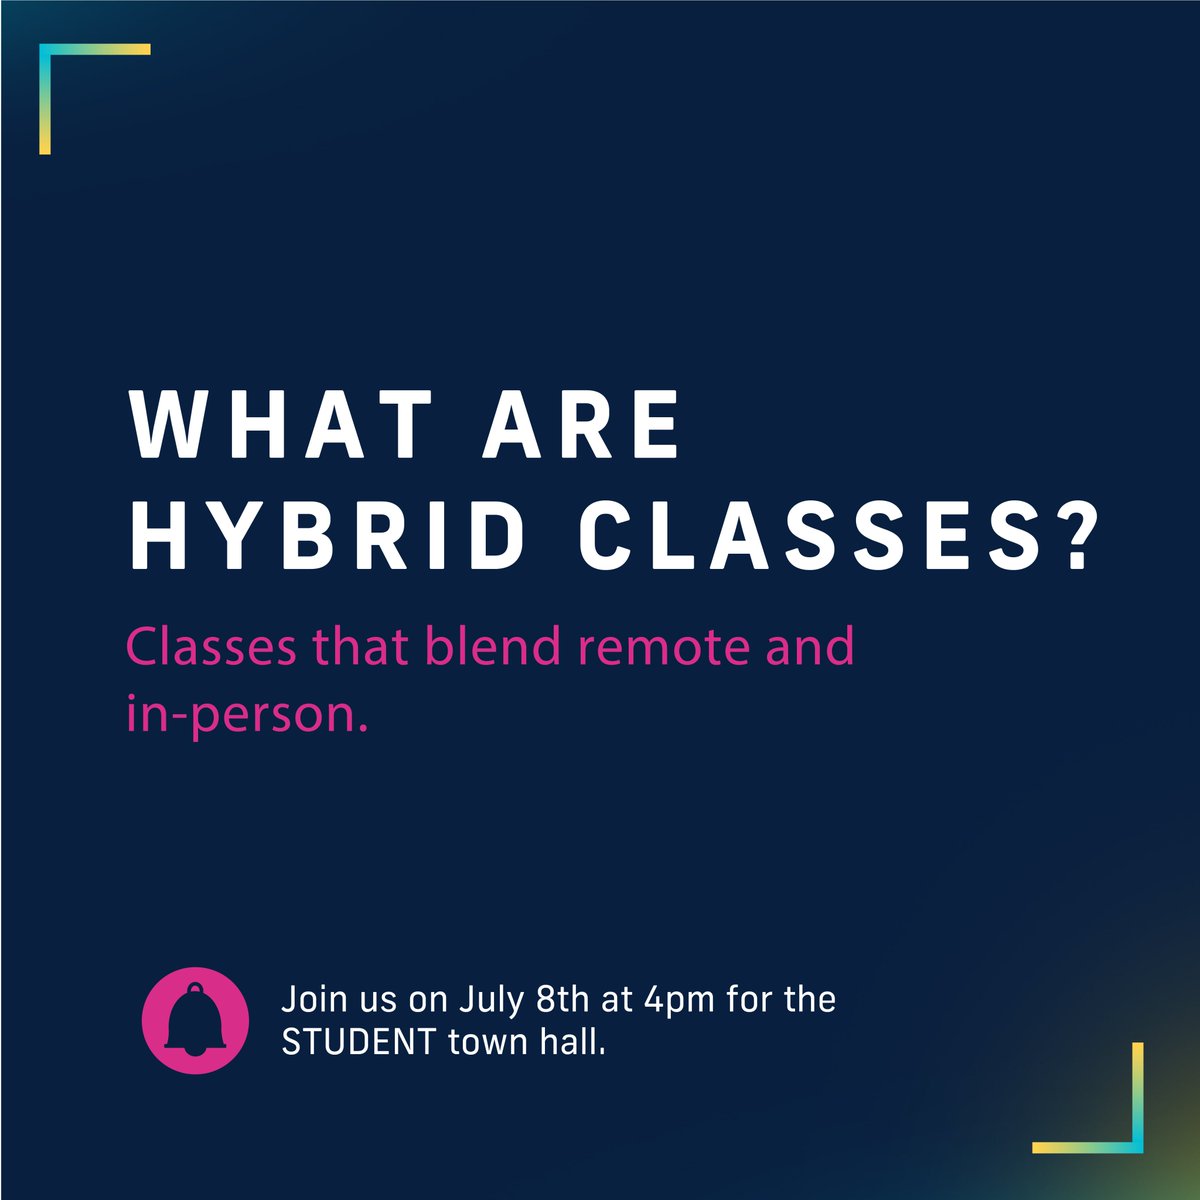 #FIUReopening - Hybrid: These meet remotely (Zoom) and on-campus in a reconfigured classroom with physical distancing. You will be required to wear a facial covering and fill out the P3 app (details soon) before coming to campus. Hybrid courses don’t have a distance learning fee.